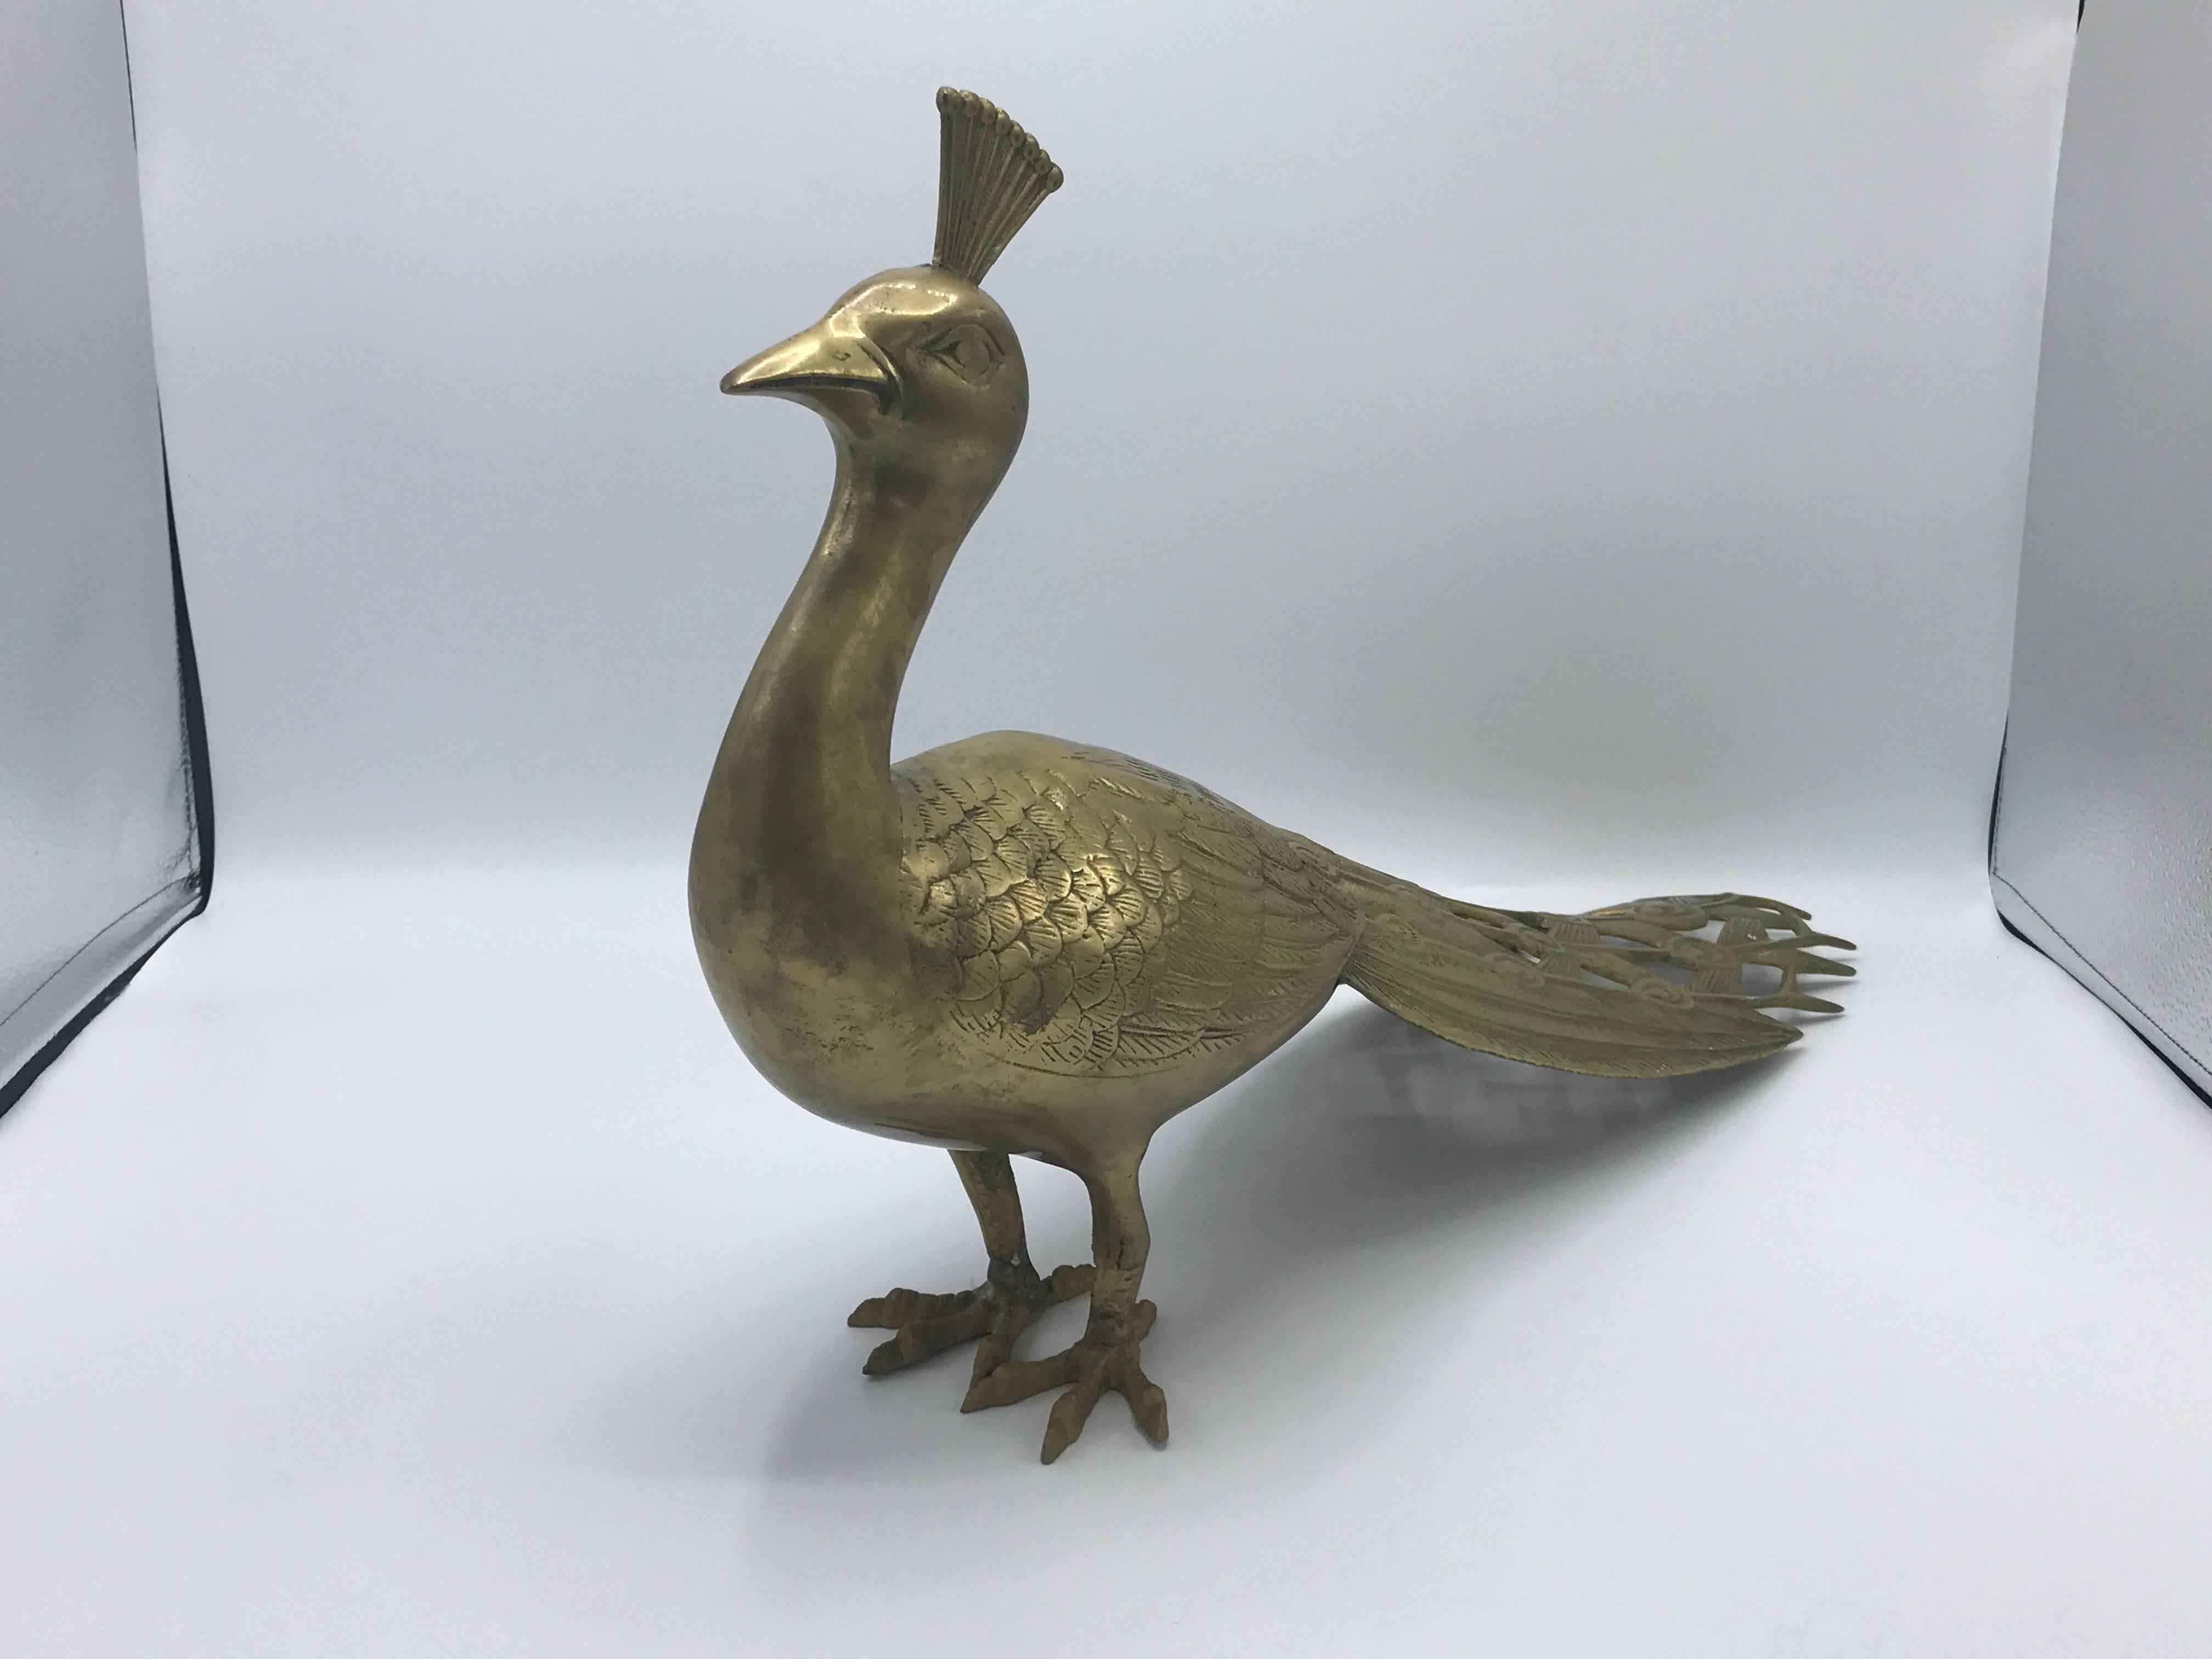 Offered is a beautiful, 1960s Sergio Bustamante style brass peacock statue. Stunning detailing.